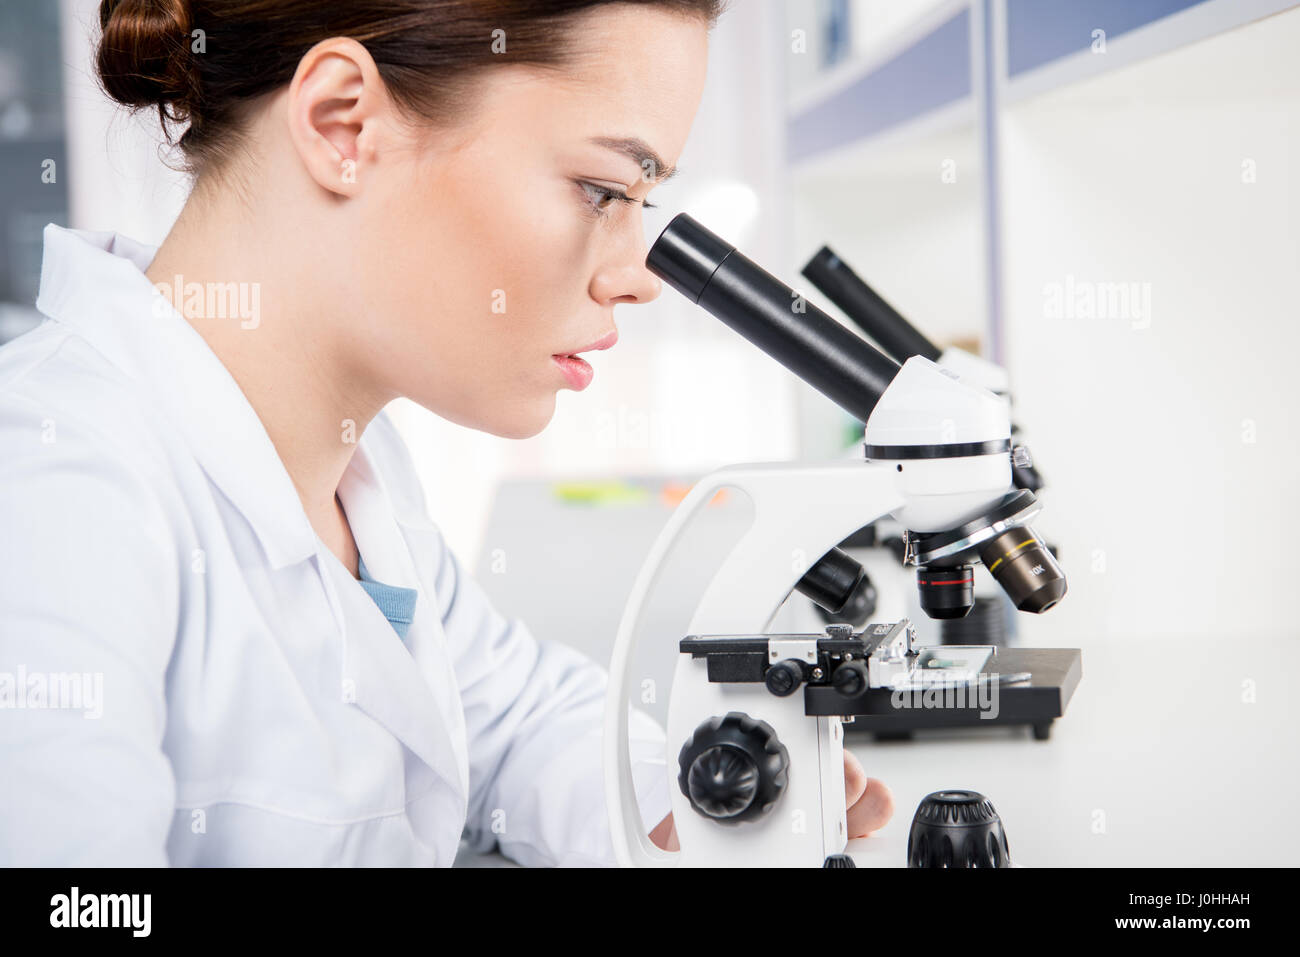 Profile of concentrated female scientist working with microscope in lab Stock Photo